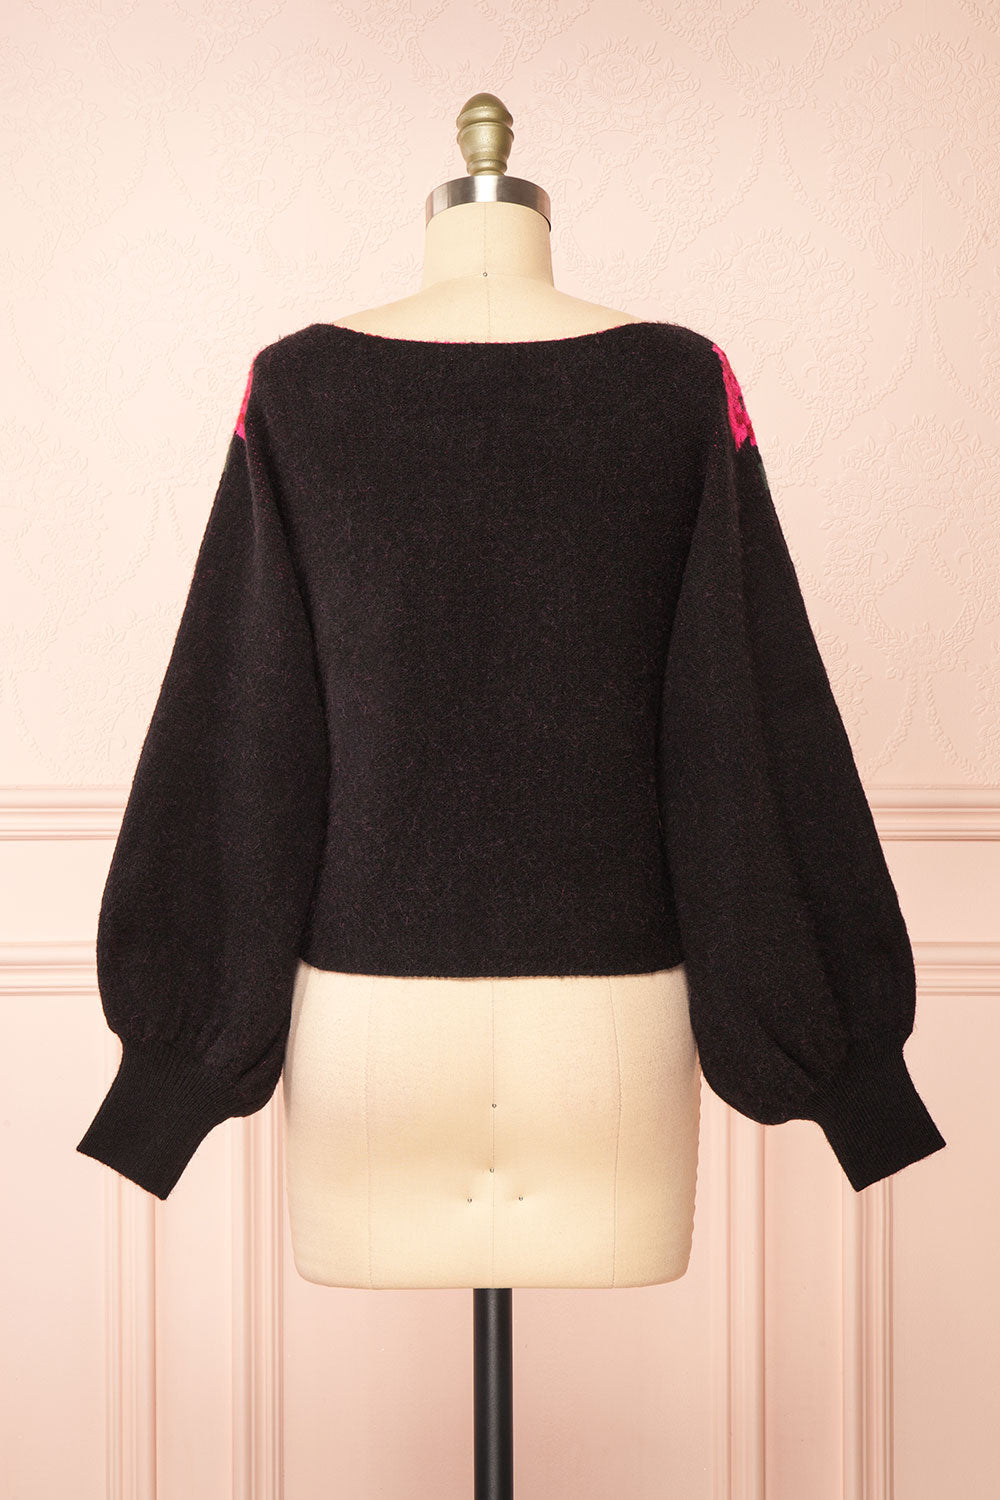 Hargeisa Black Knit Sweater w/ Boat Neckline | Boutique 1861 back view